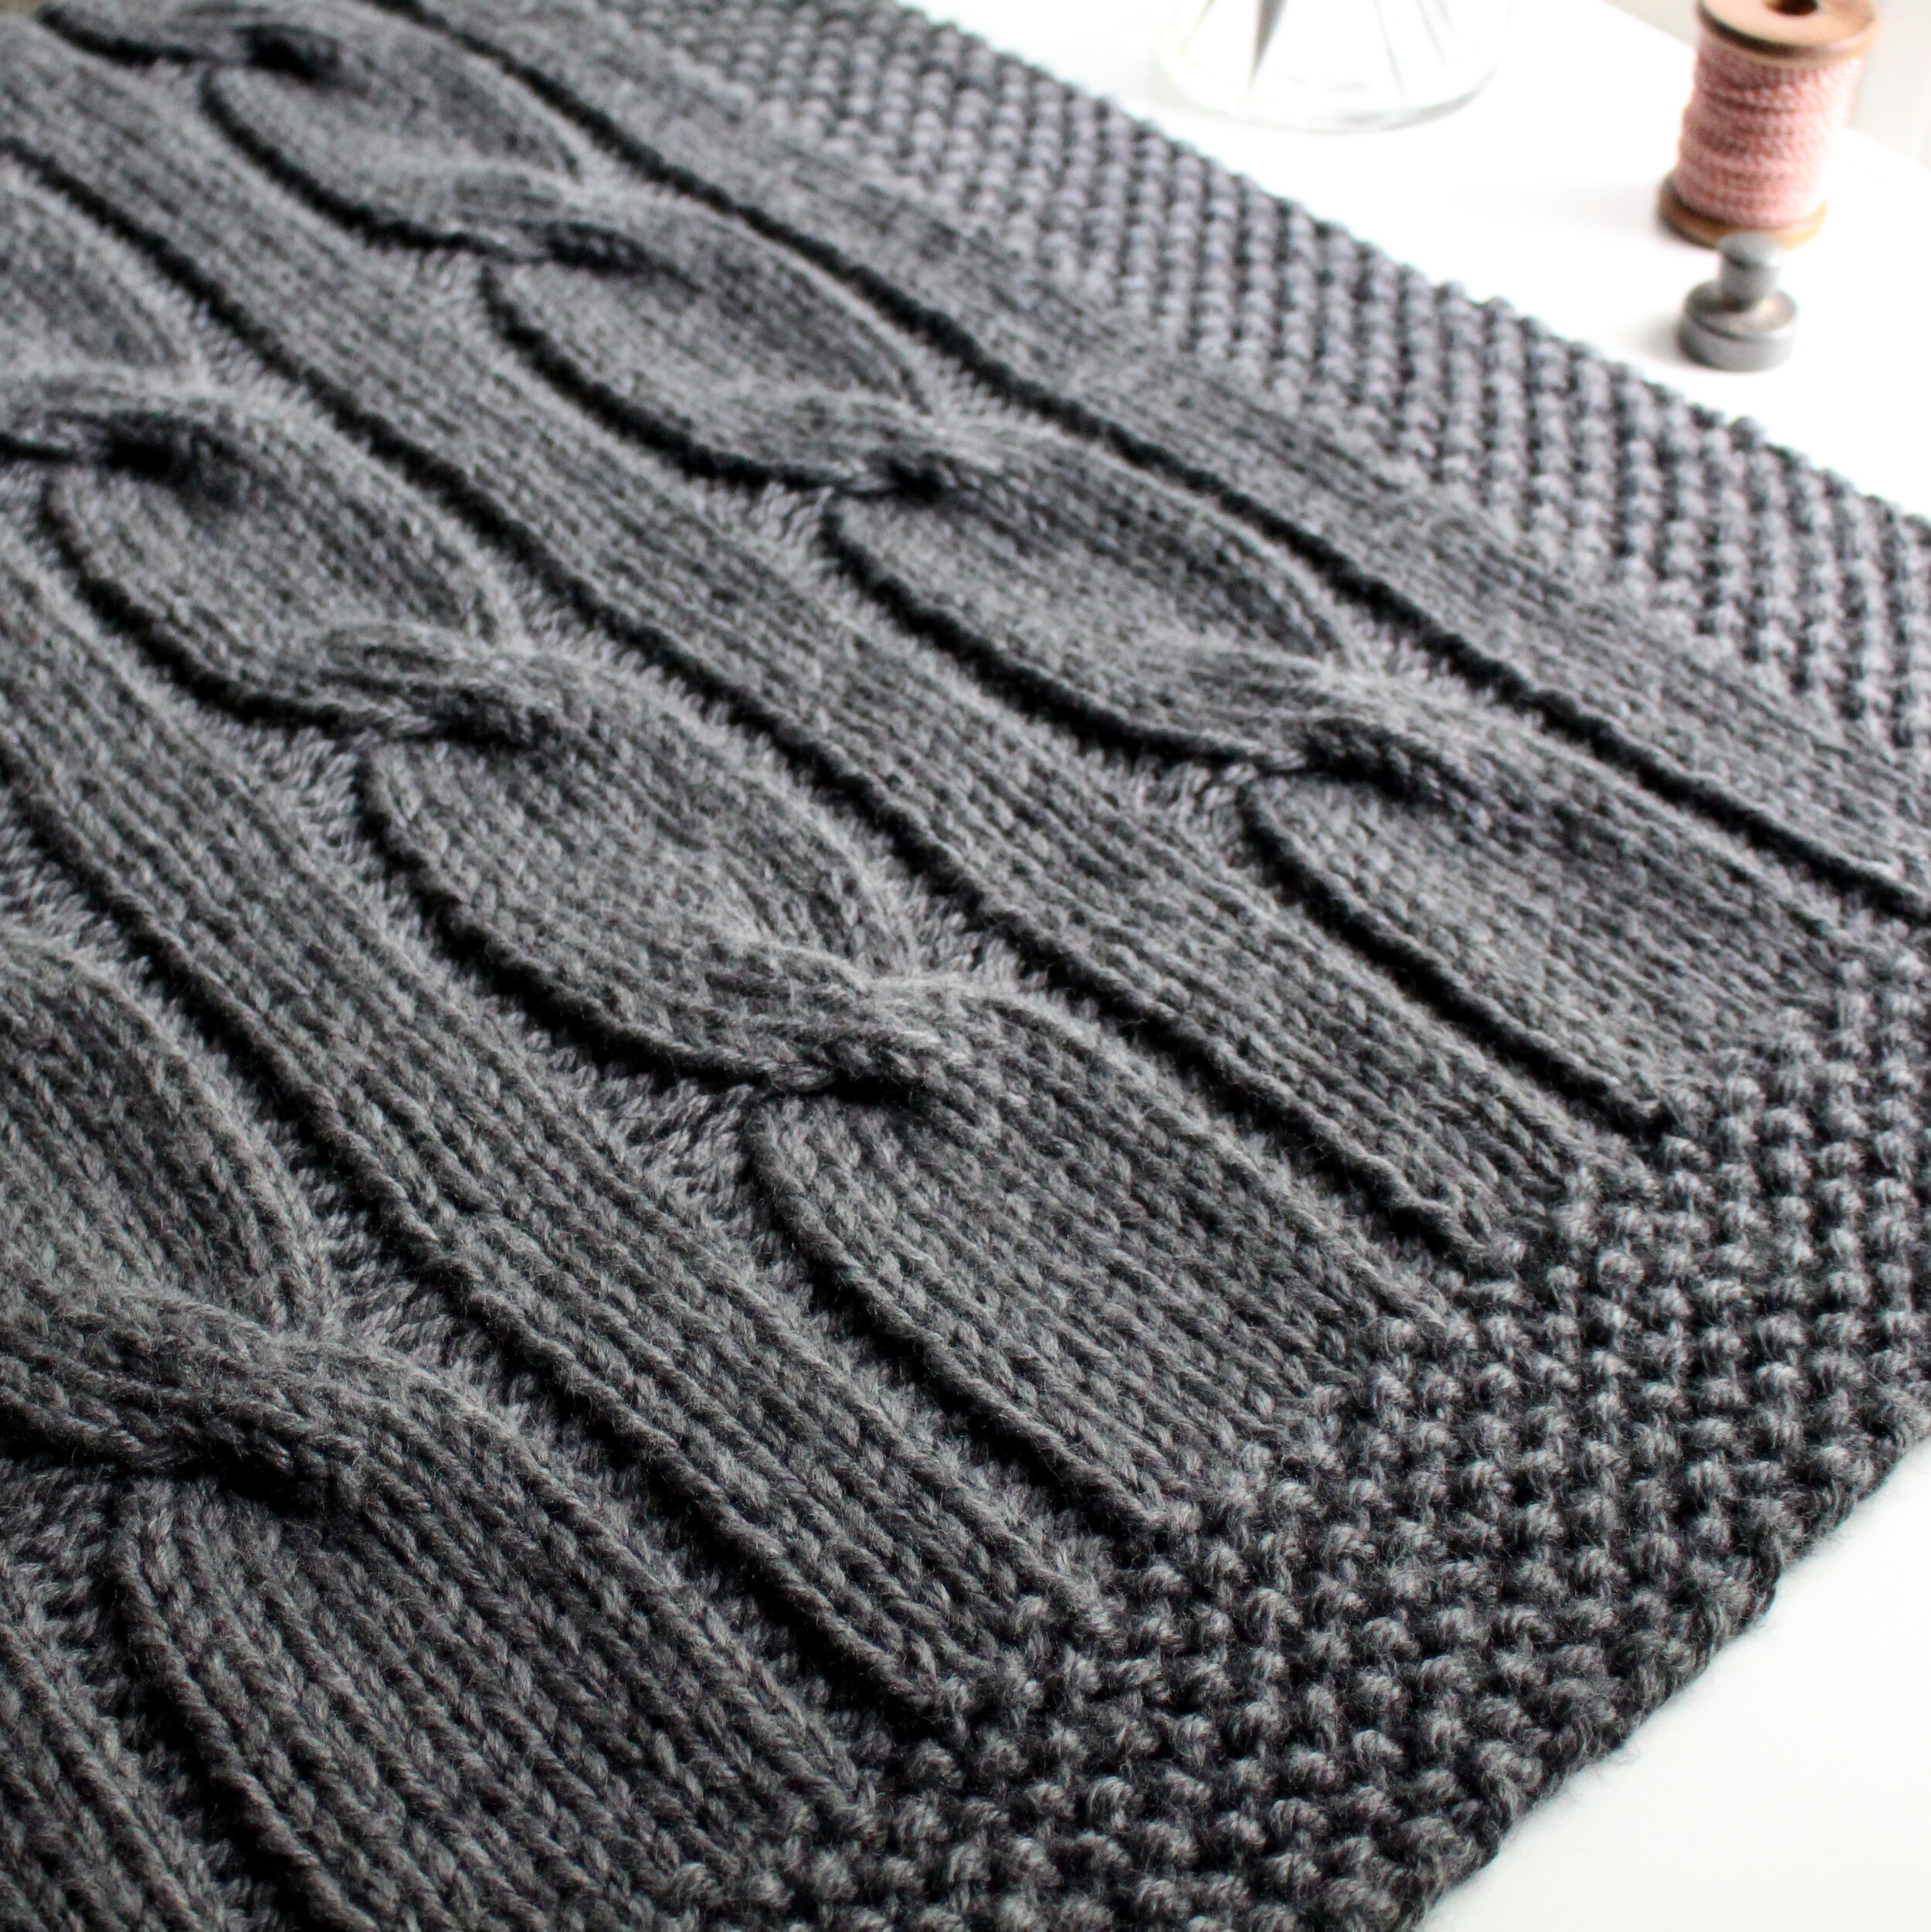 Easy Cable Blanket Afghan Chunky Knitting Pattern for Super Bulky